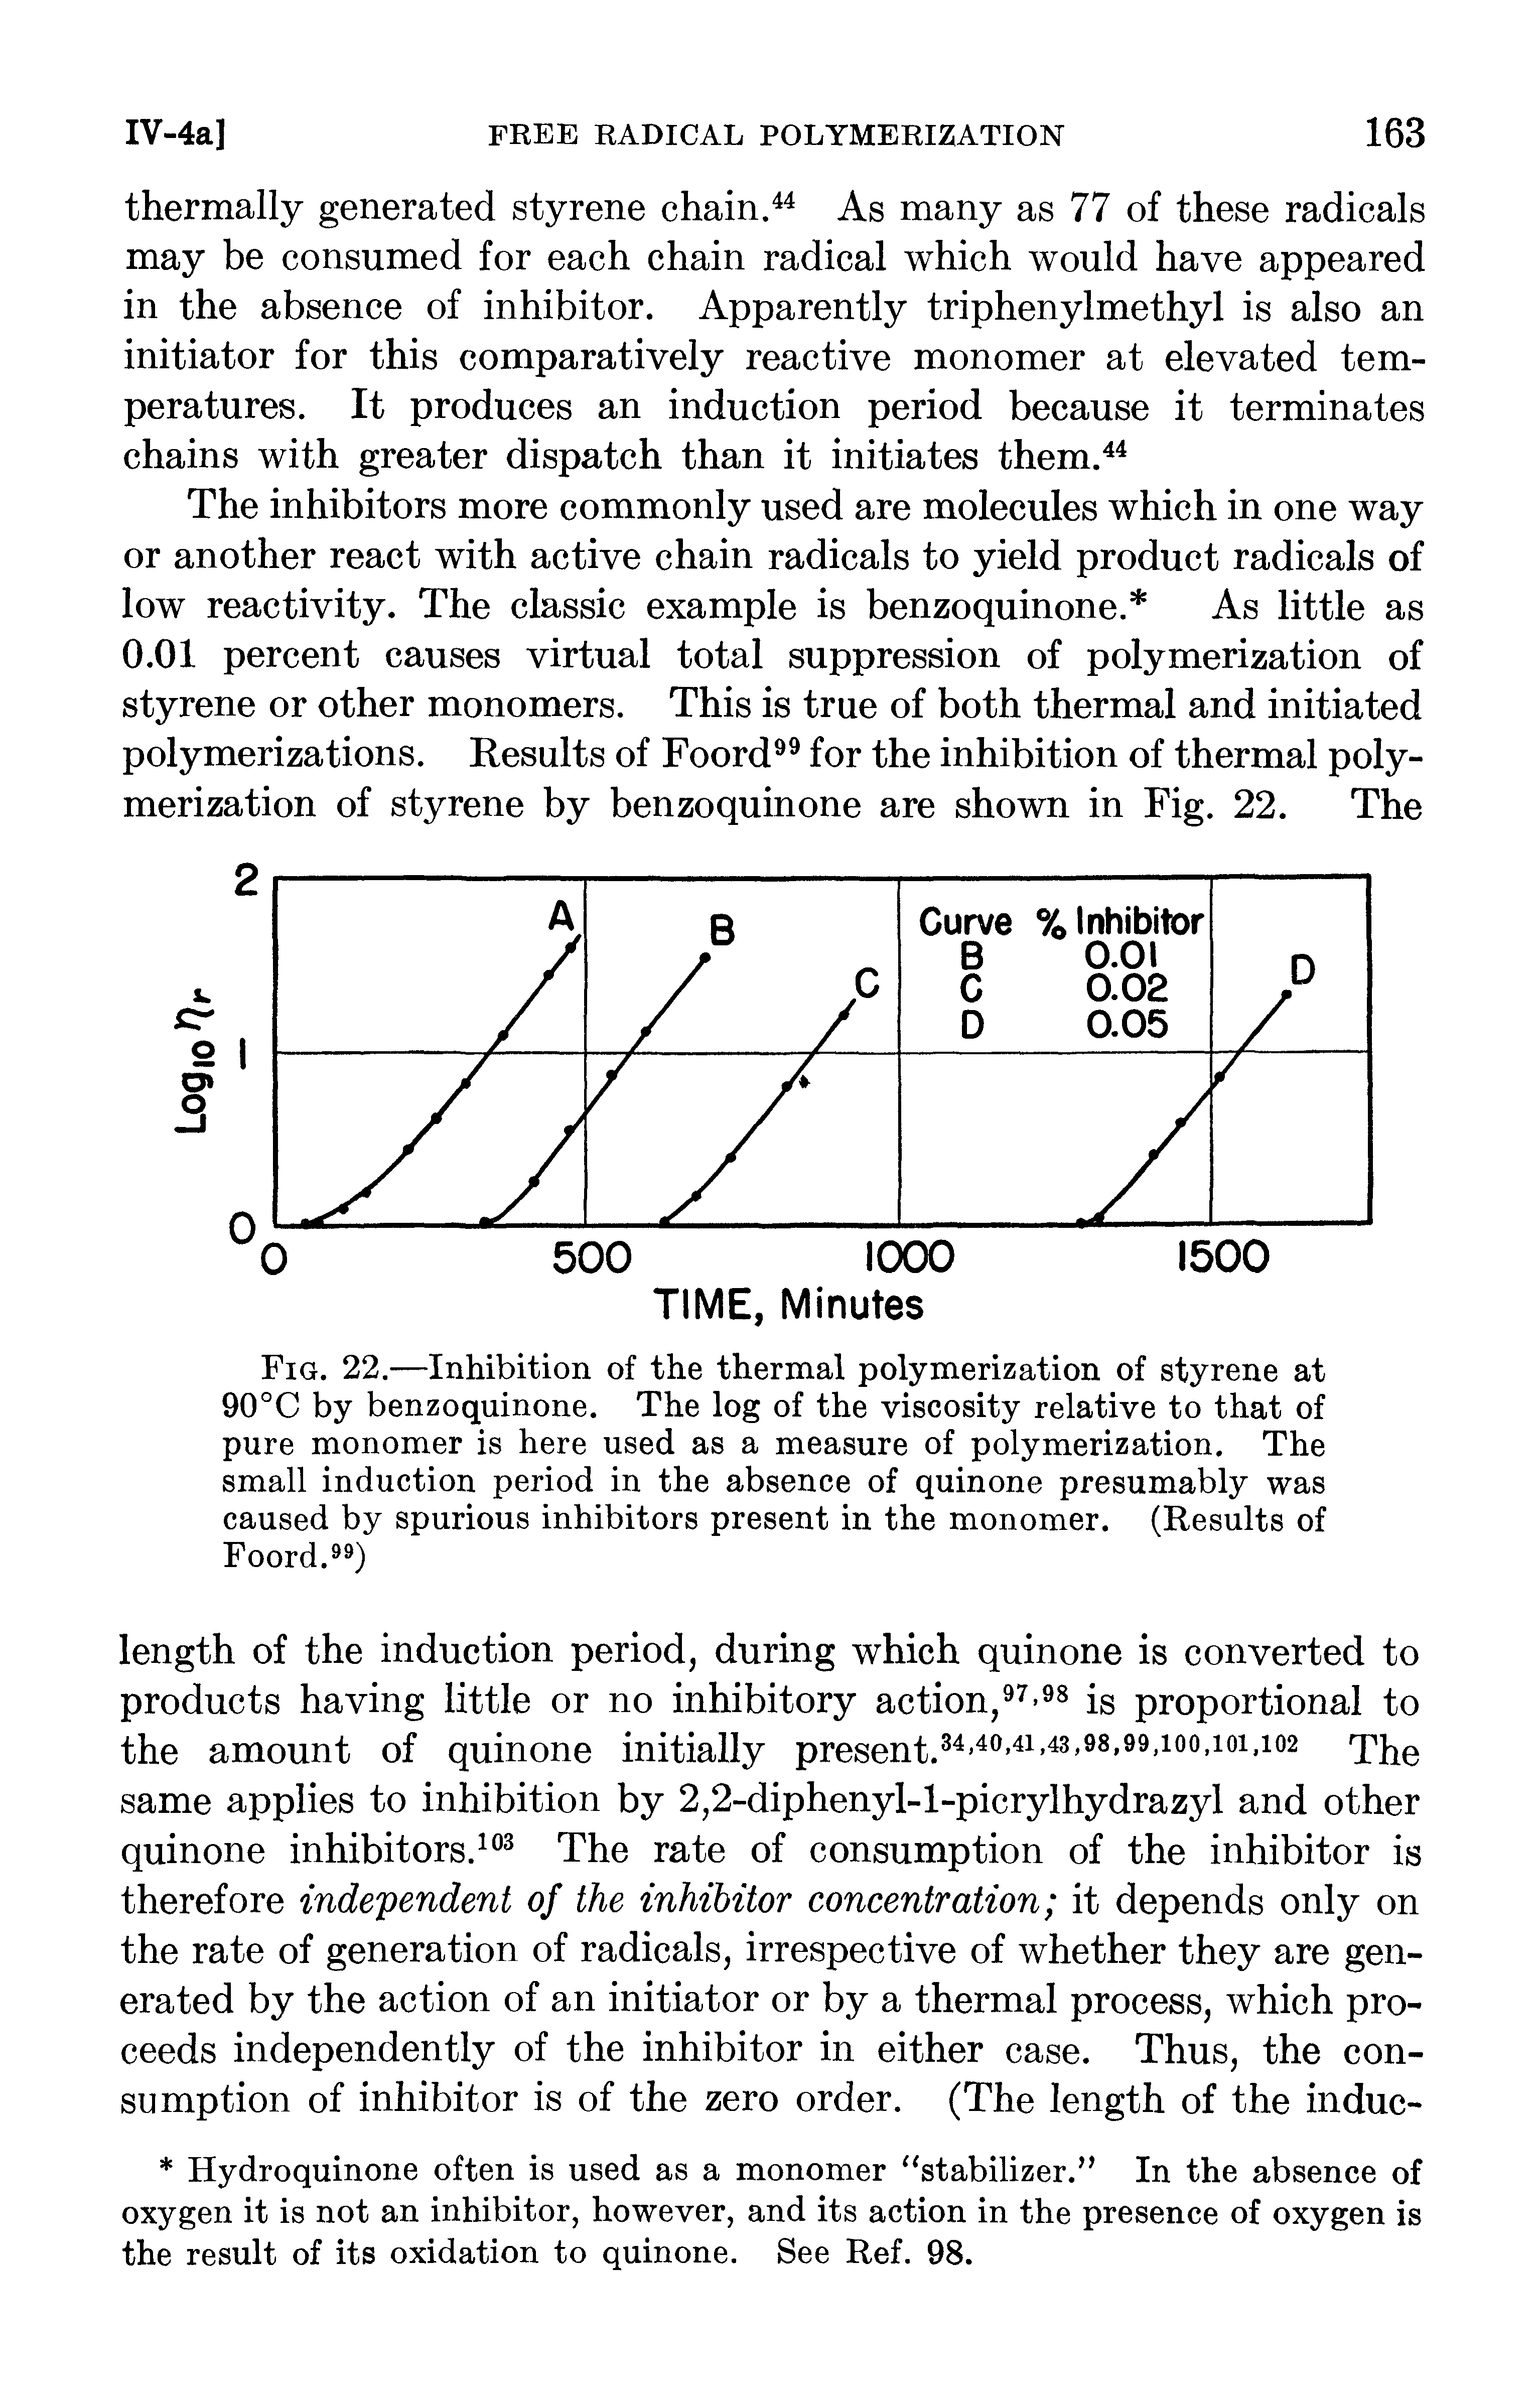 Fig. 22.—Inhibition of the thermal polymerization of styrene at 90°C by benzoquinone. The log of the viscosity relative to that of pure monomer is here used as a measure of polymerization. The small induction period in the absence of quinone presumably was caused by spurious inhibitors present in the monomer. (Results of Foord. )...